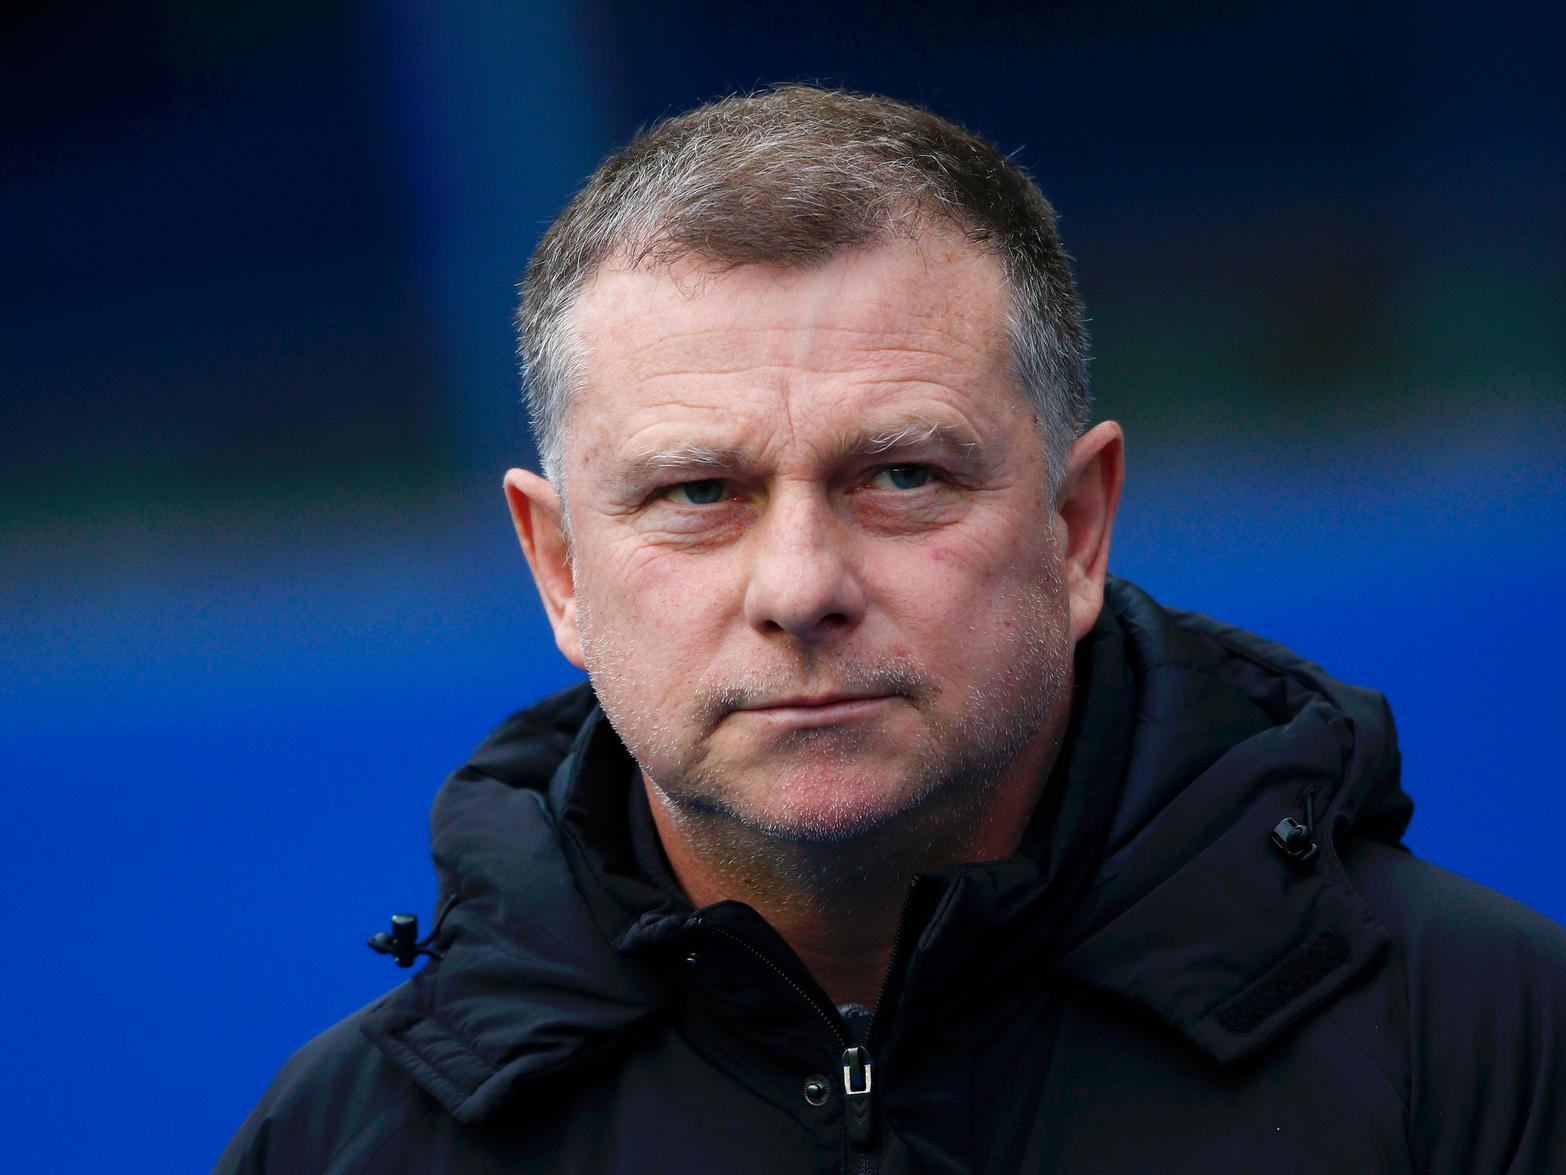 Reports on Saturday have claimed Sky Blues boss Mark Robins is a potential target for Blues as Pep Clotet is set for the sack at St Andrew's. (Coventry Live)